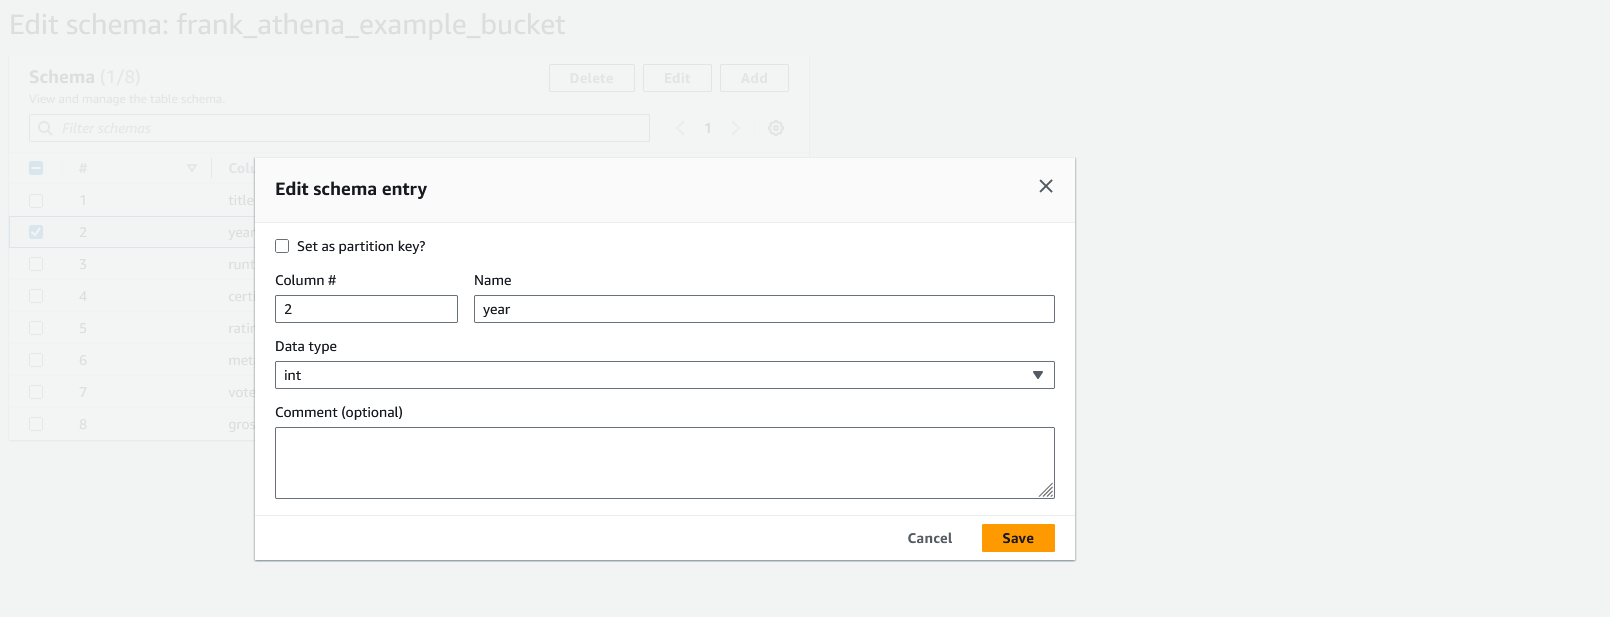 AWS Glue's edit schema modal for the year column. Has fields for column number, name, data type, and comments.